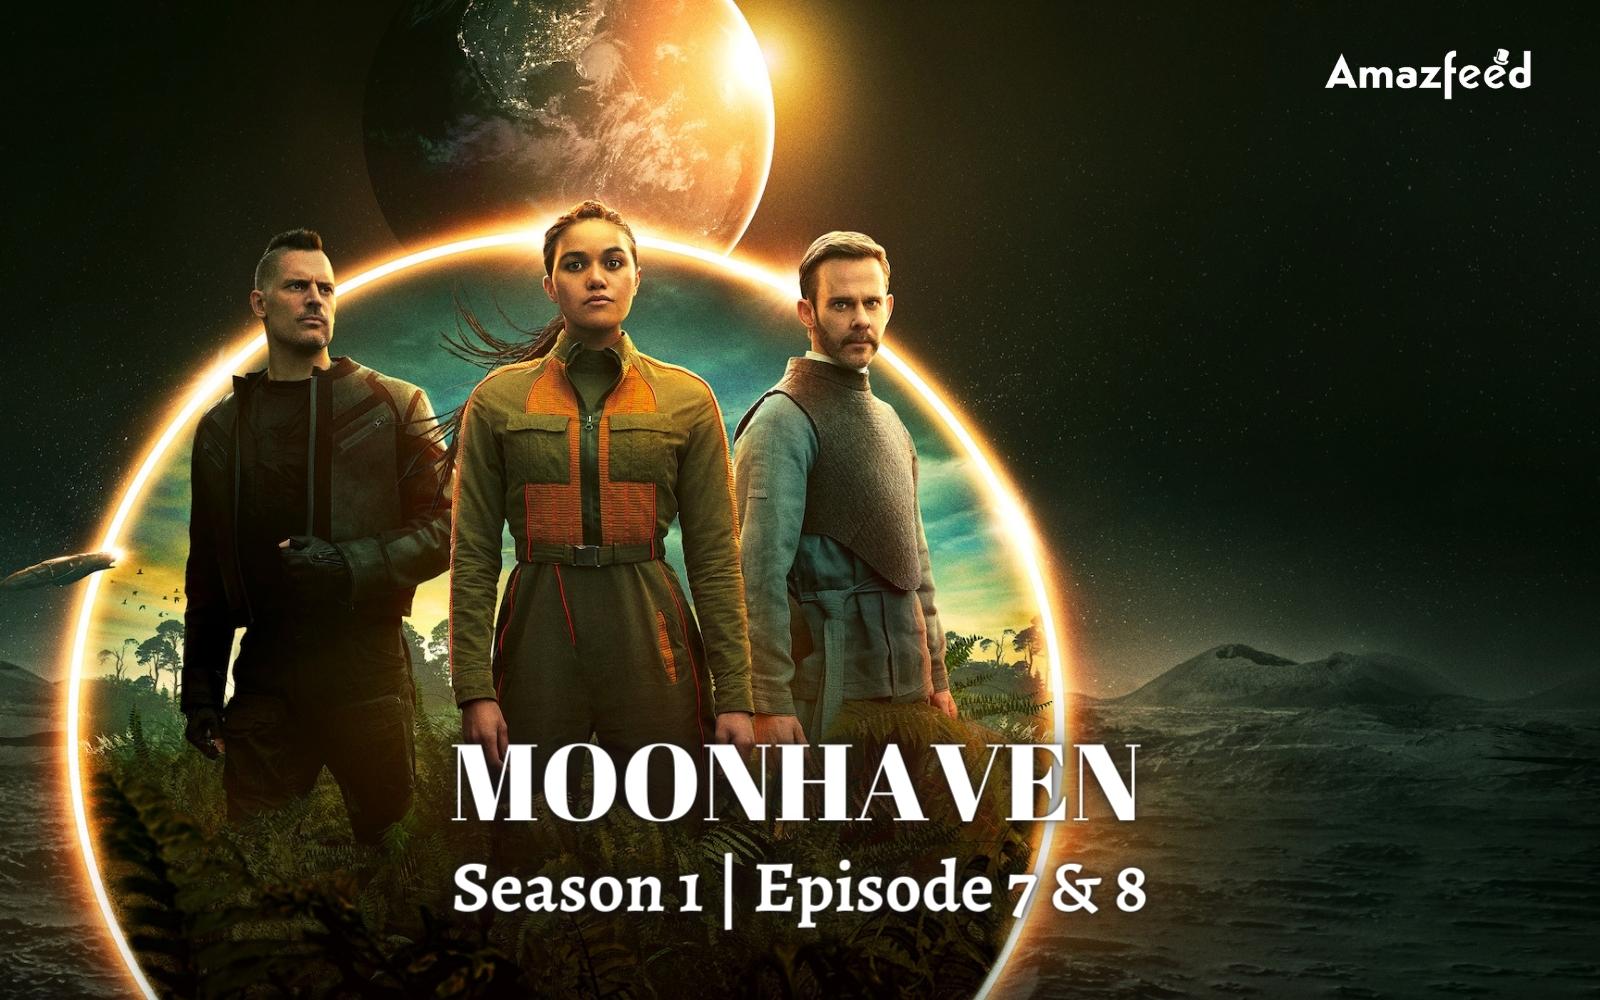 Moonhaven Episode 7 & 8 ⇒ Is Moonhaven Season 1 ended? News Updates, Reviews & More